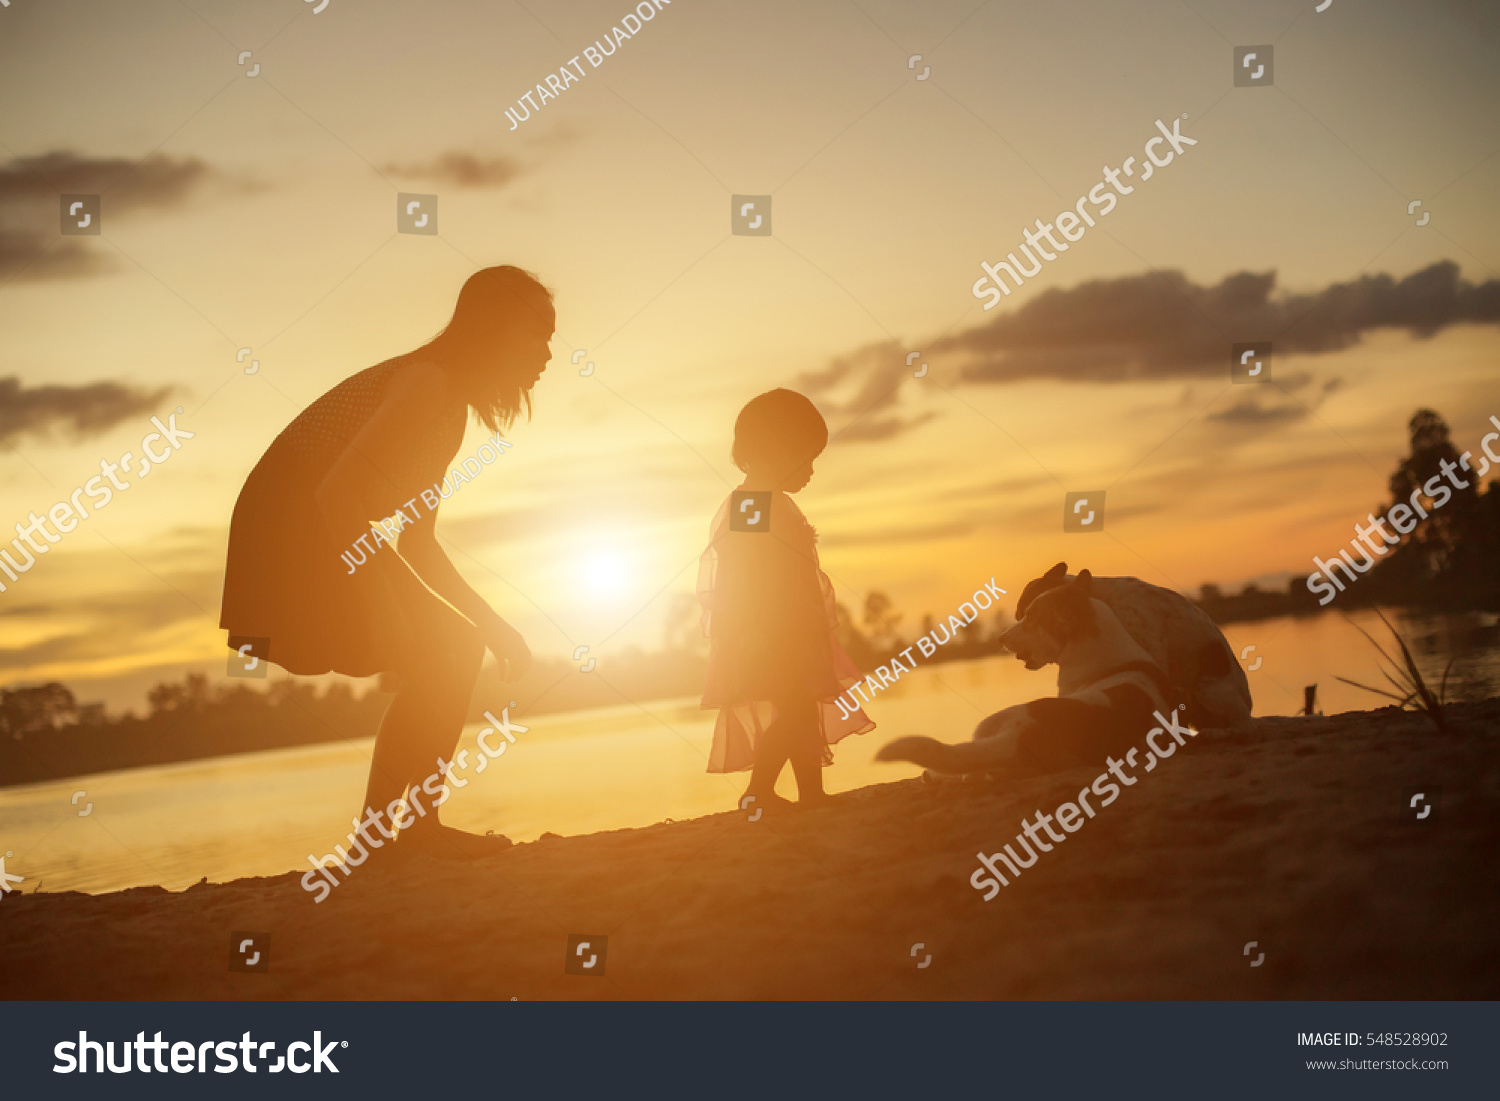 Silhouettes of mother and little daughter walking at sunset #548528902